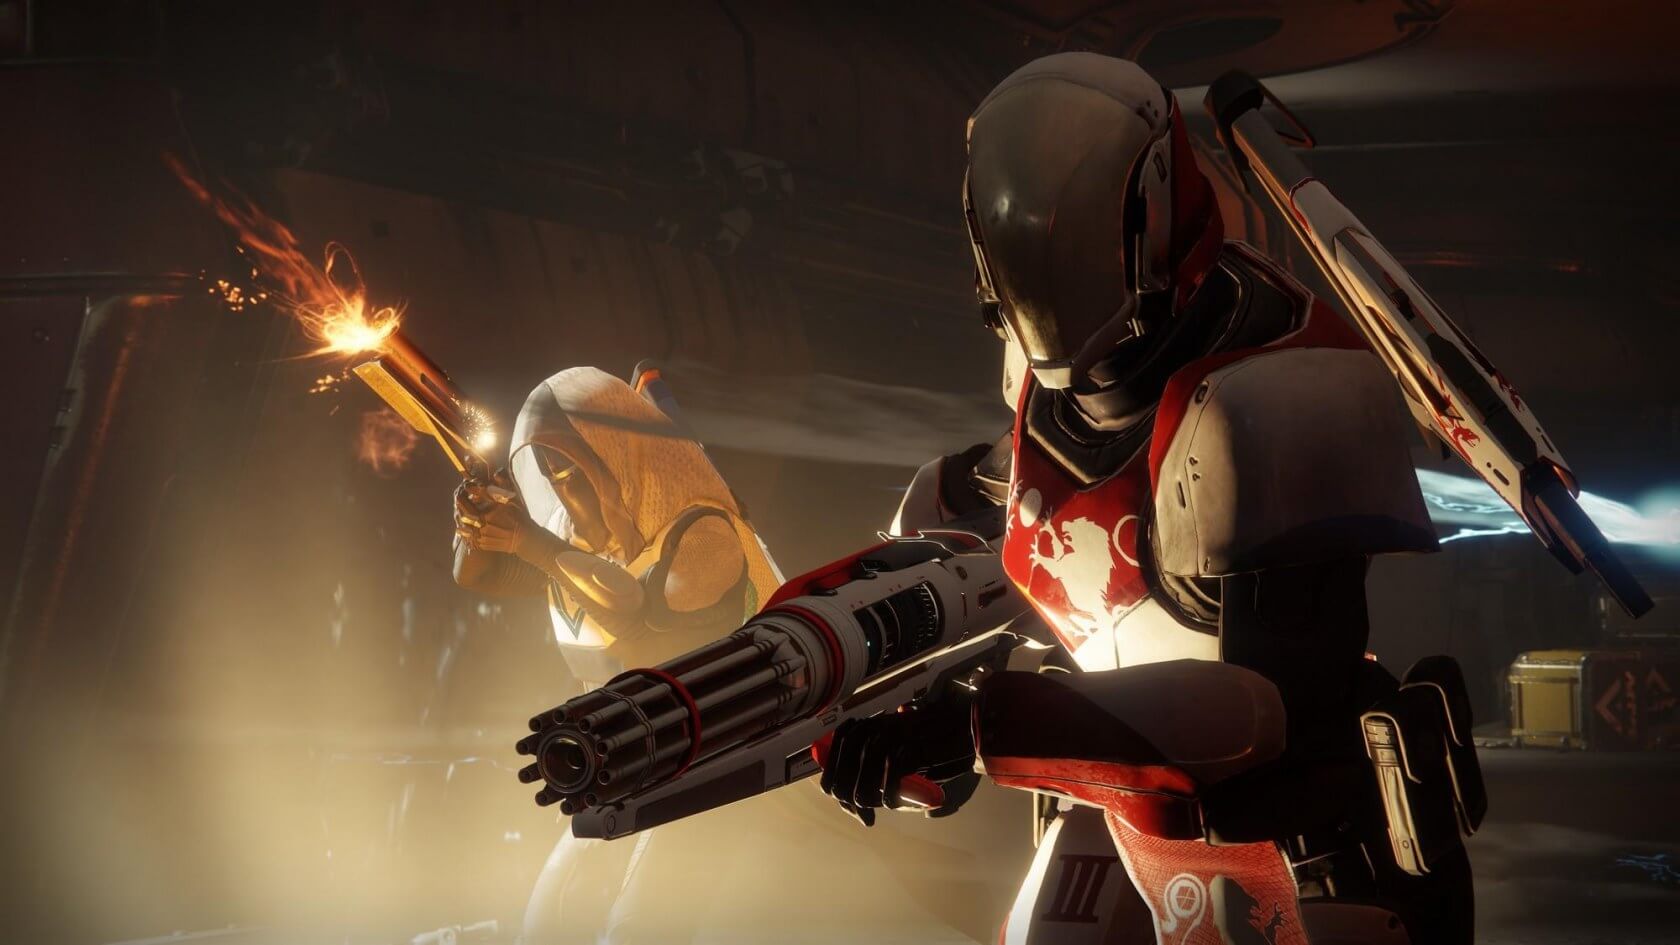 Destiny 2 is free to keep if you download it on PC before November 18